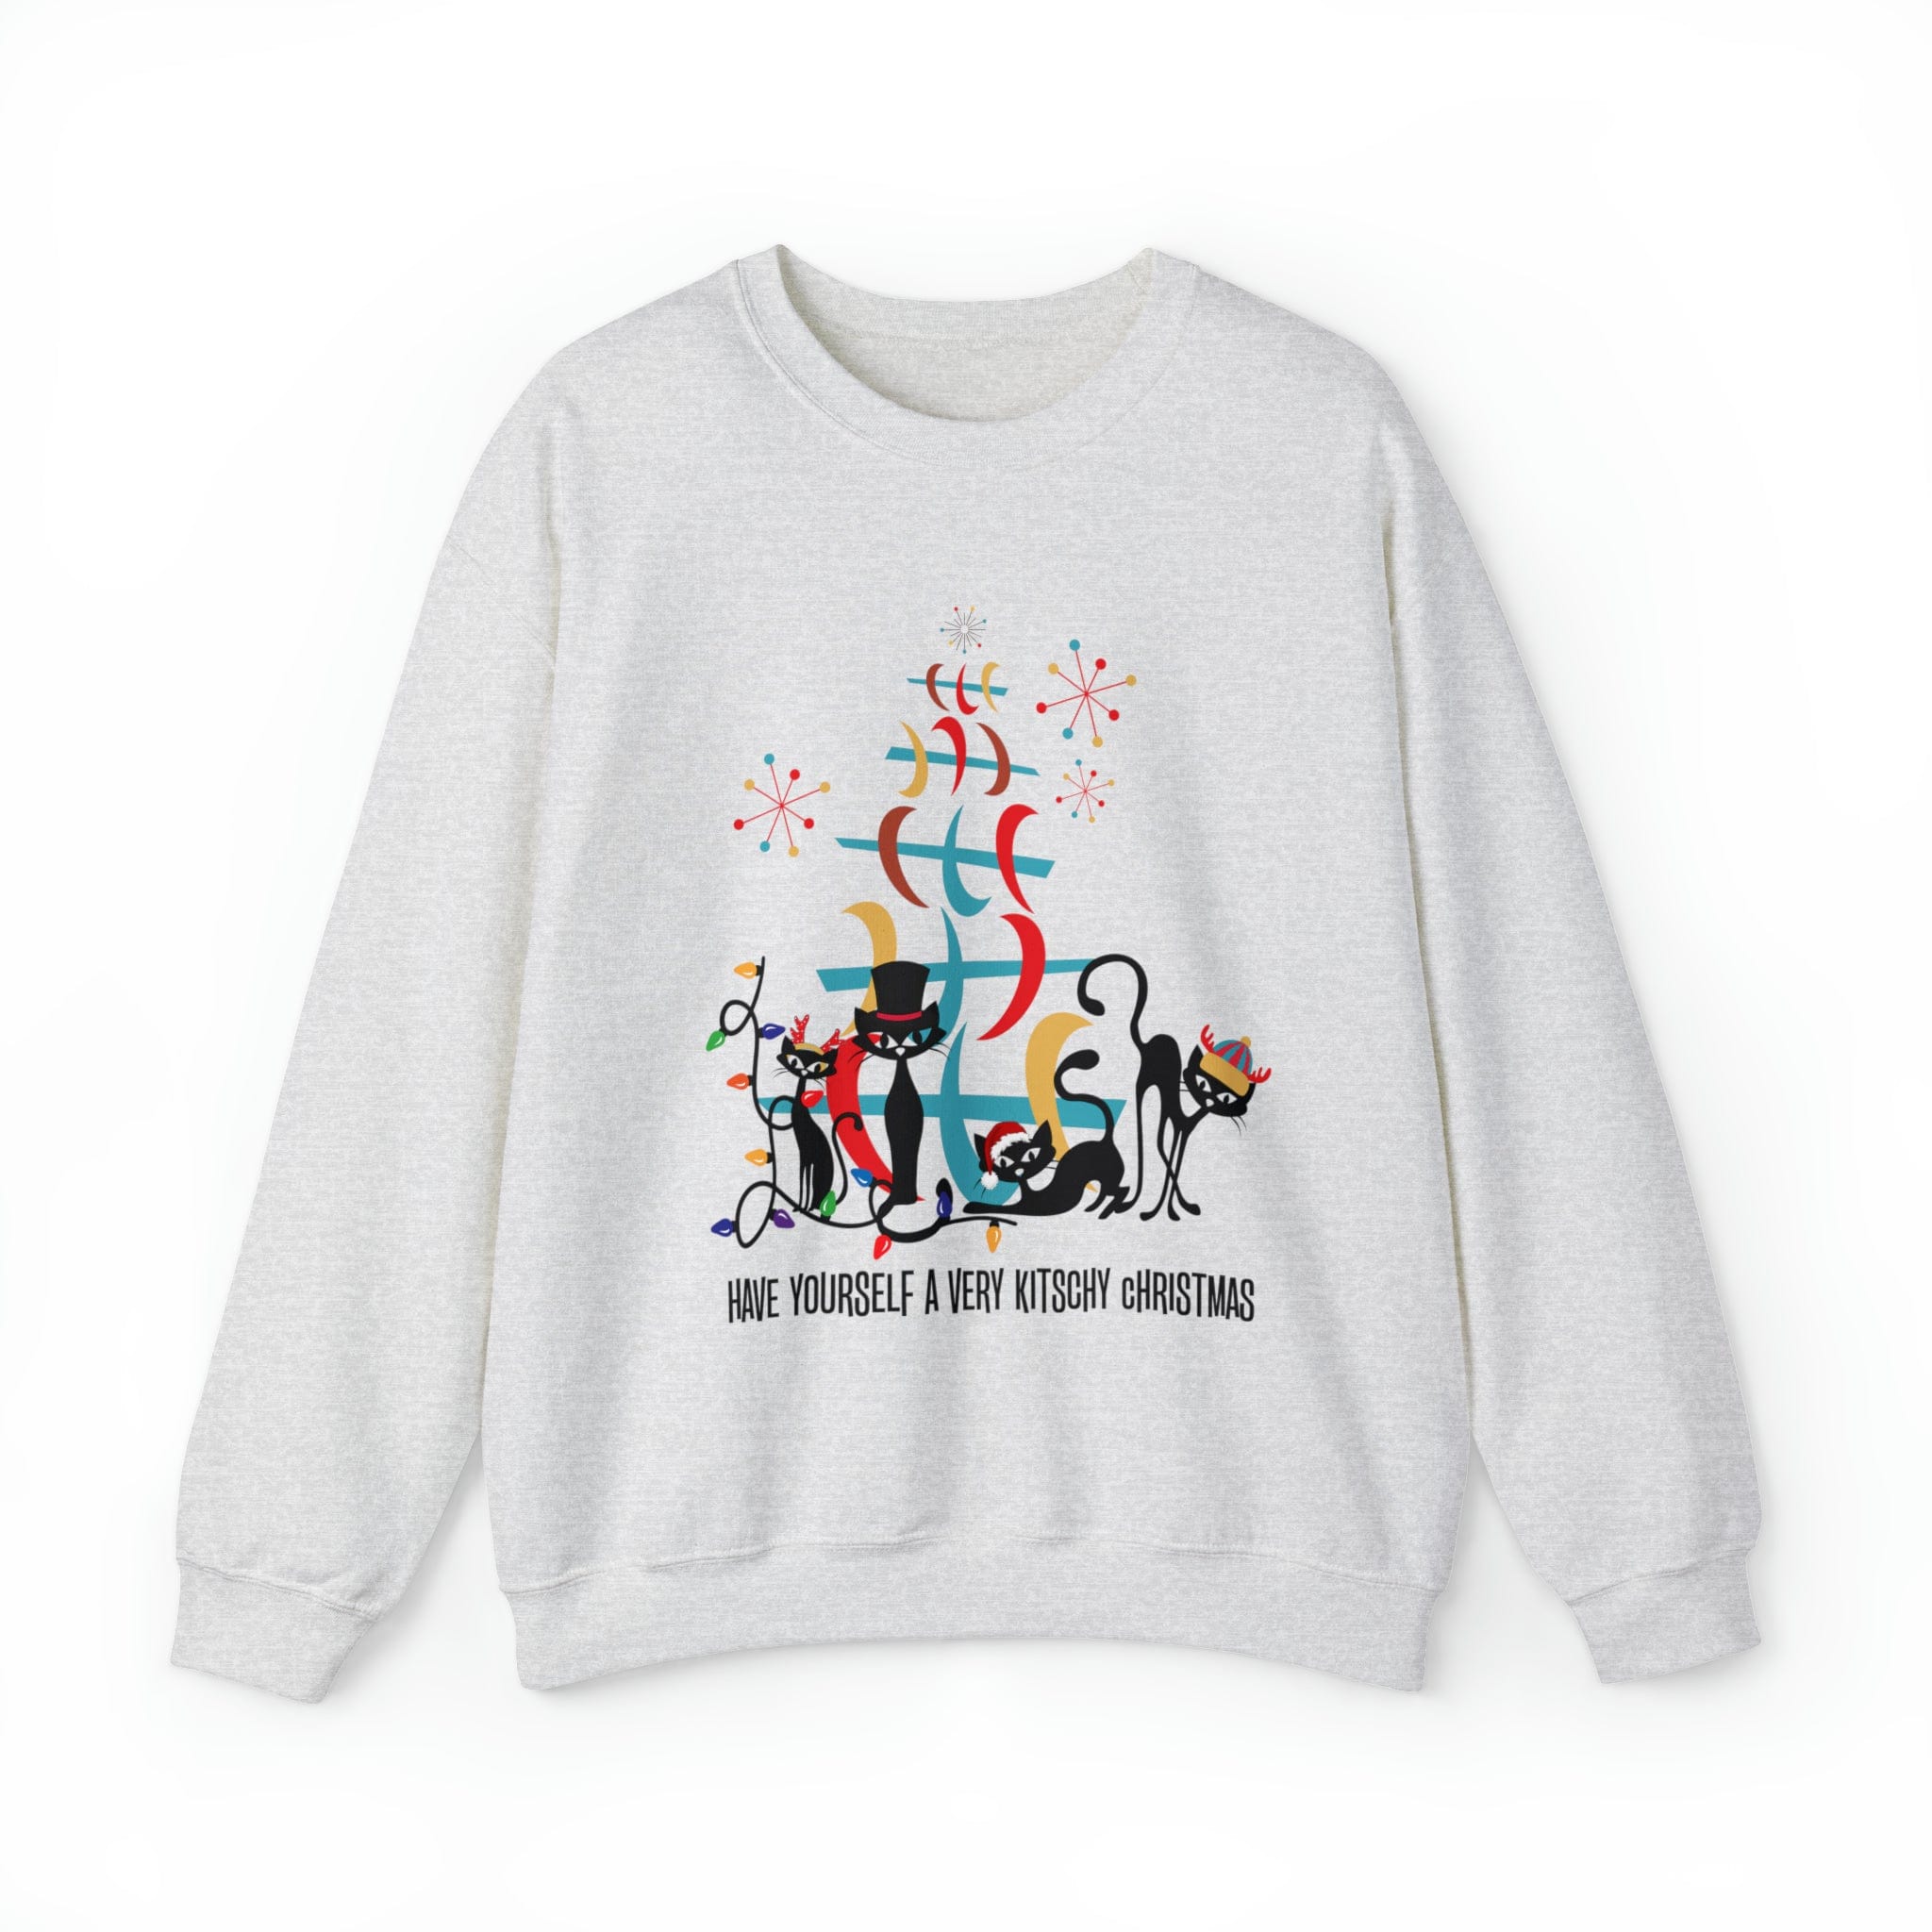 Atomic Cat Christmas Sweater, Have Yourself A Very Kitschy Christmas Cozy Loose Fit, Sweatshirt Sweatshirt 2XL / Ash